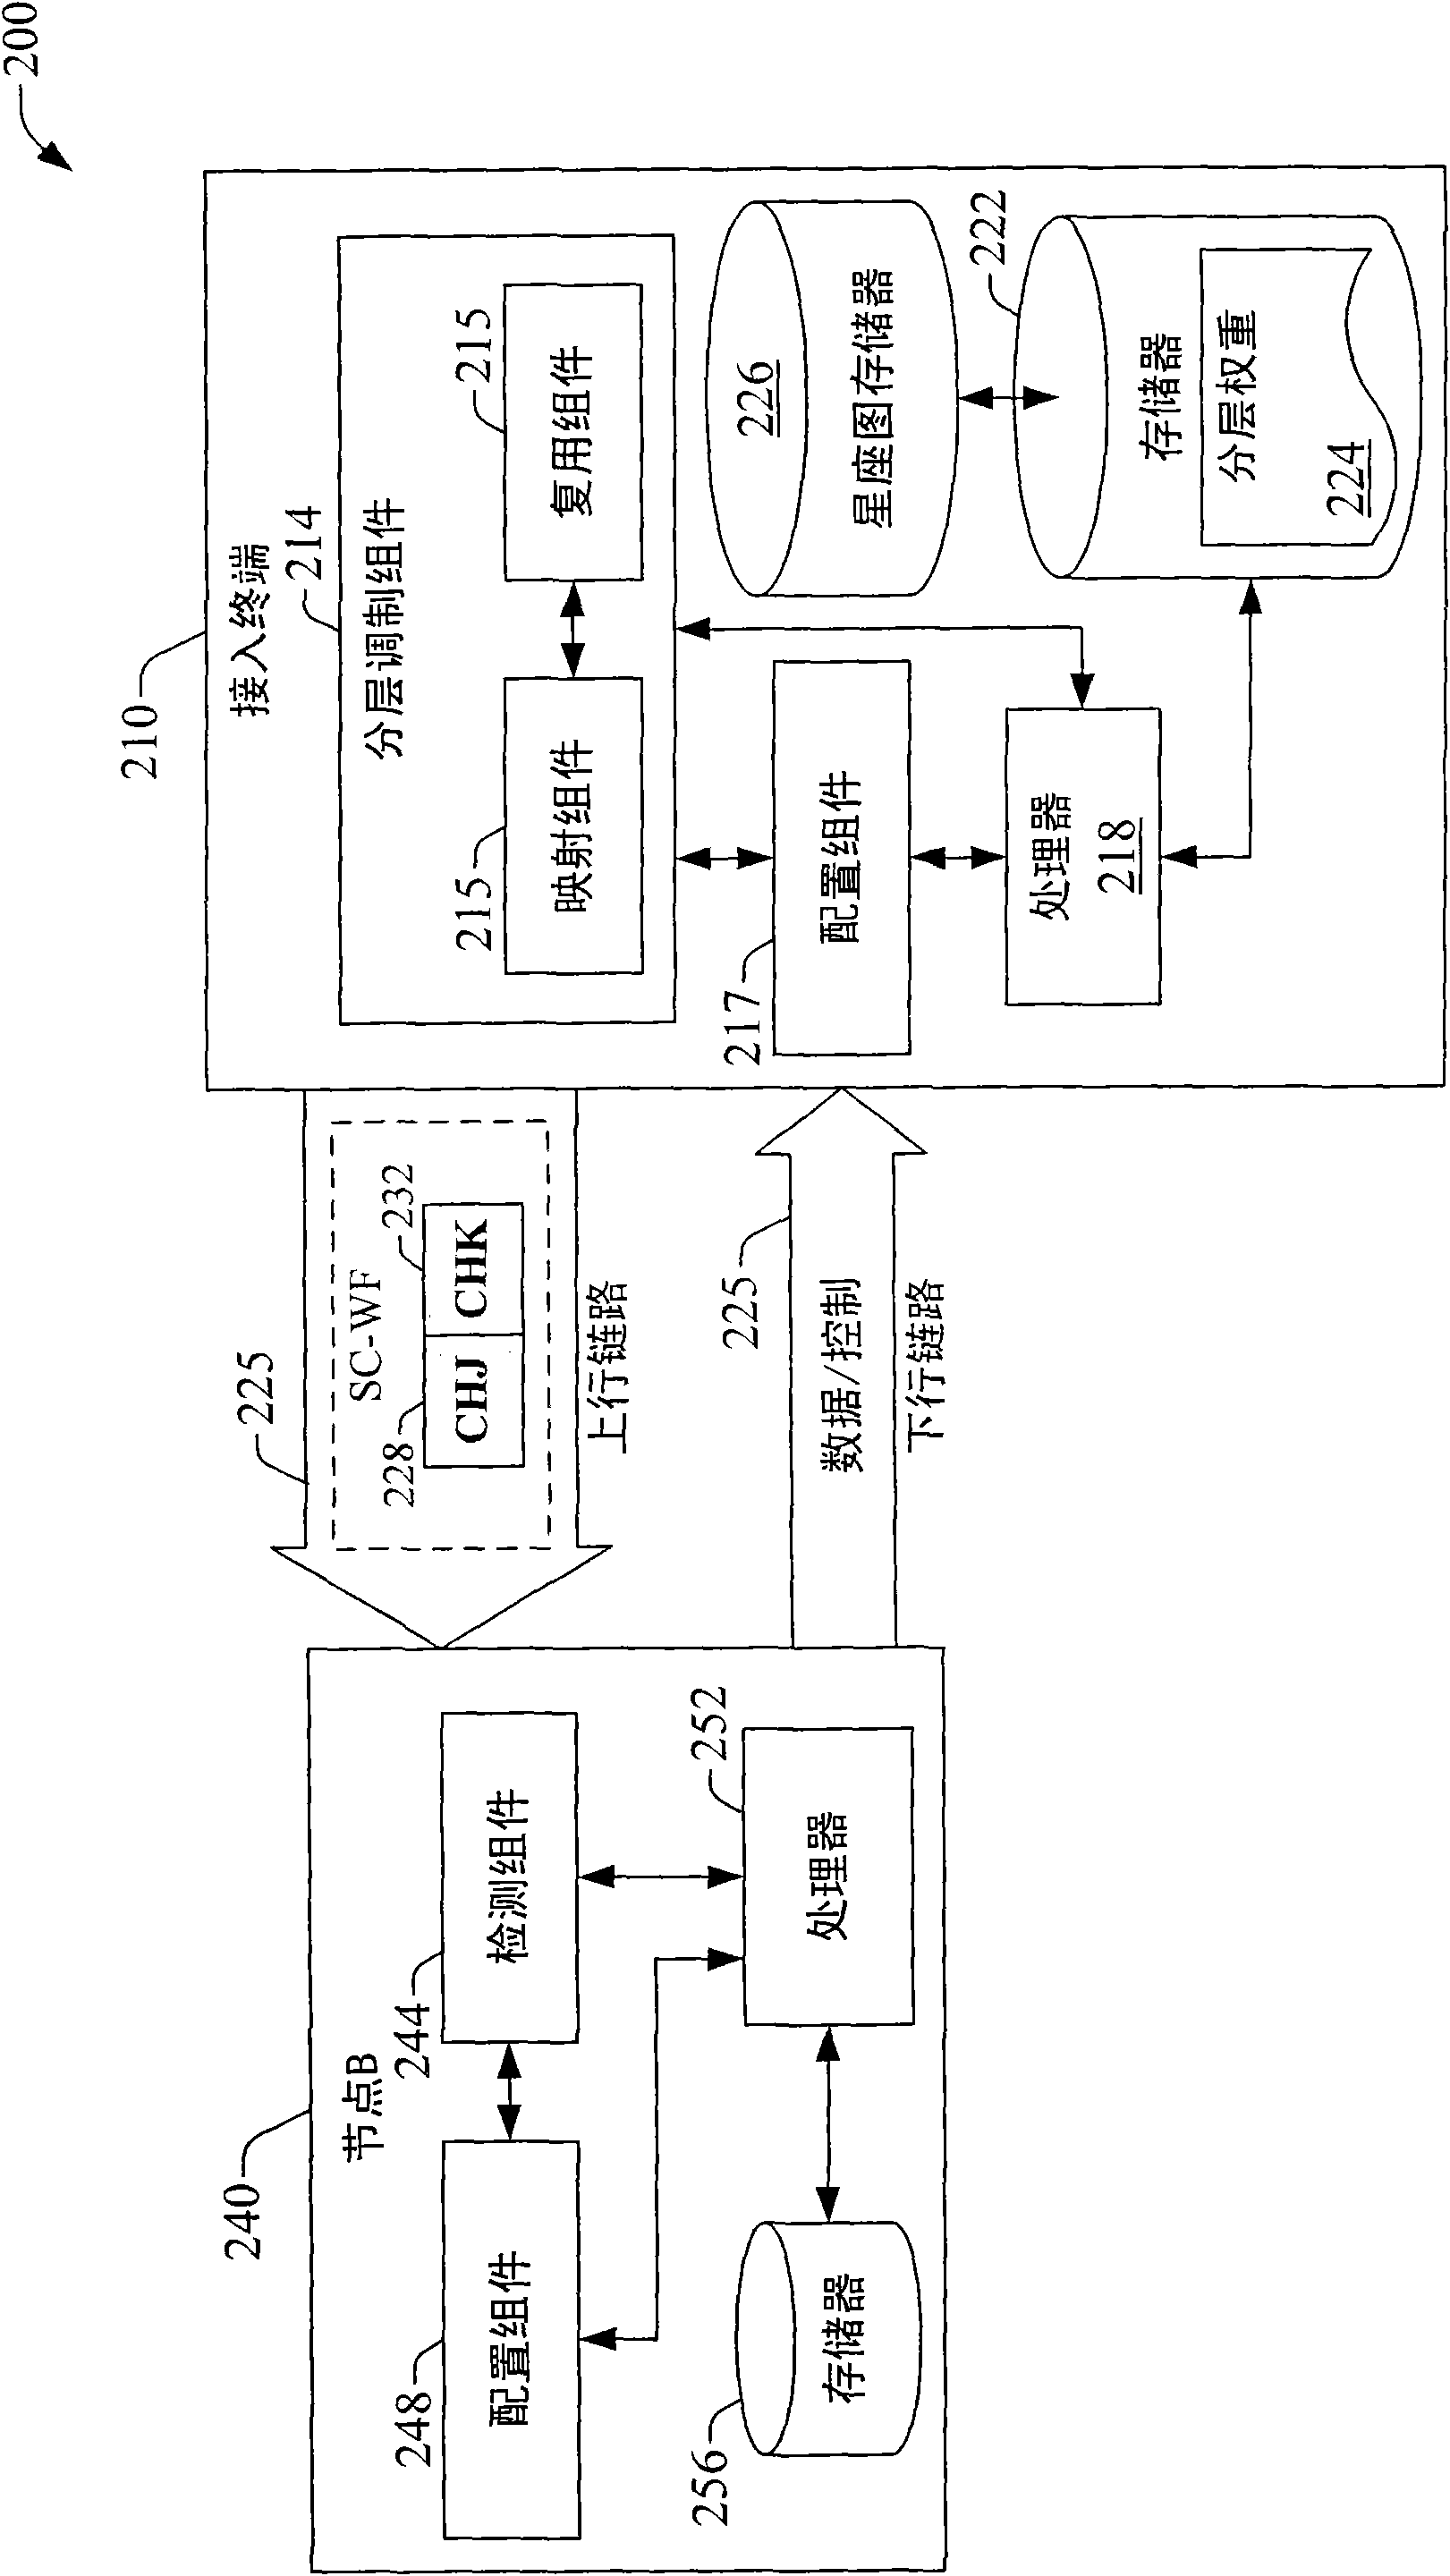 Hierarchical modulation for communication channels in single-carrier frequency division multiple access